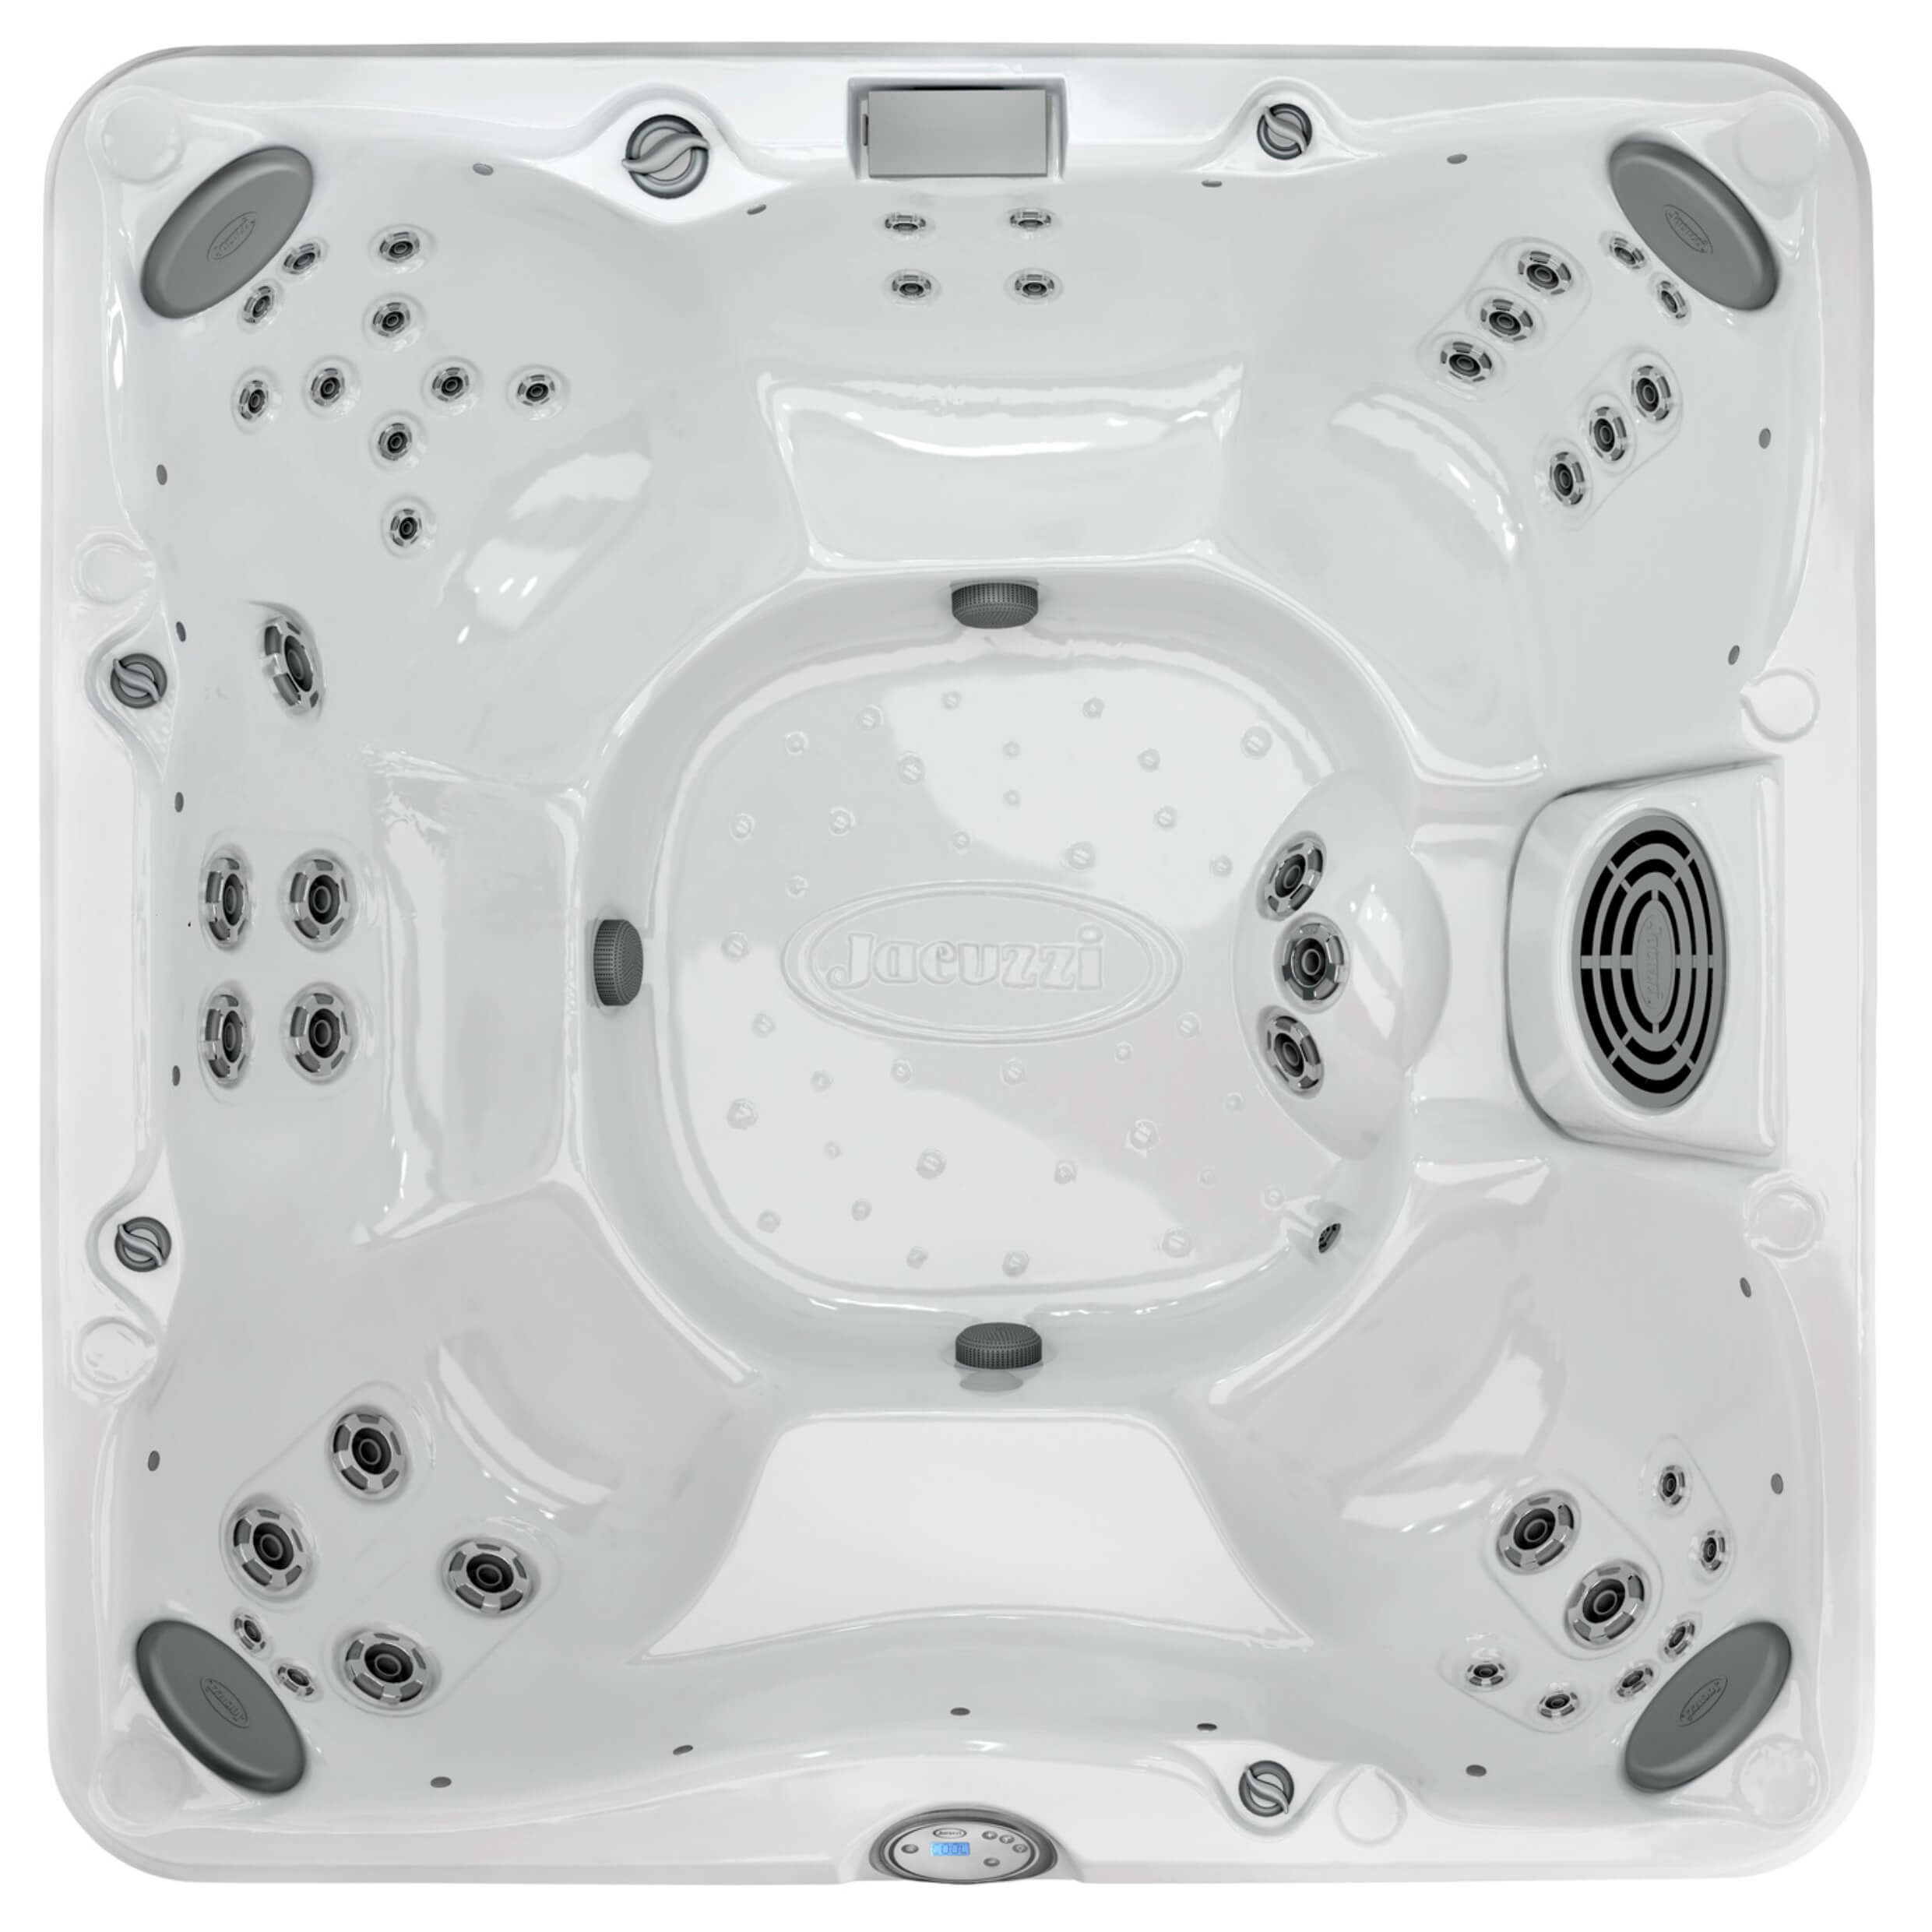 Jacuzzi J280 Hot Tub Outdoor Living Jacuzzi Direct